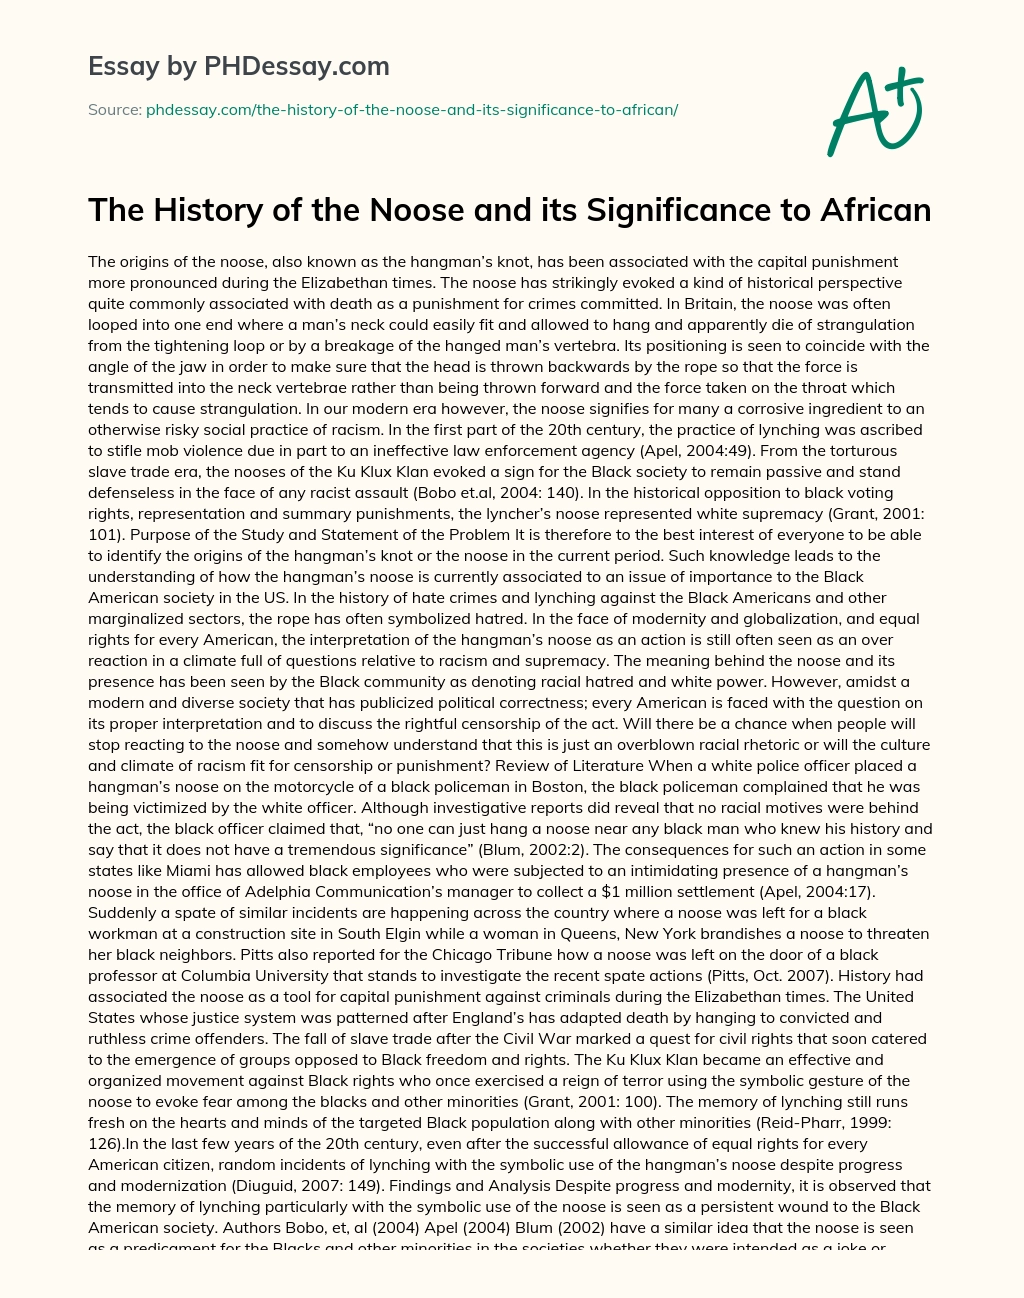 The History of the Noose and its Significance to African essay